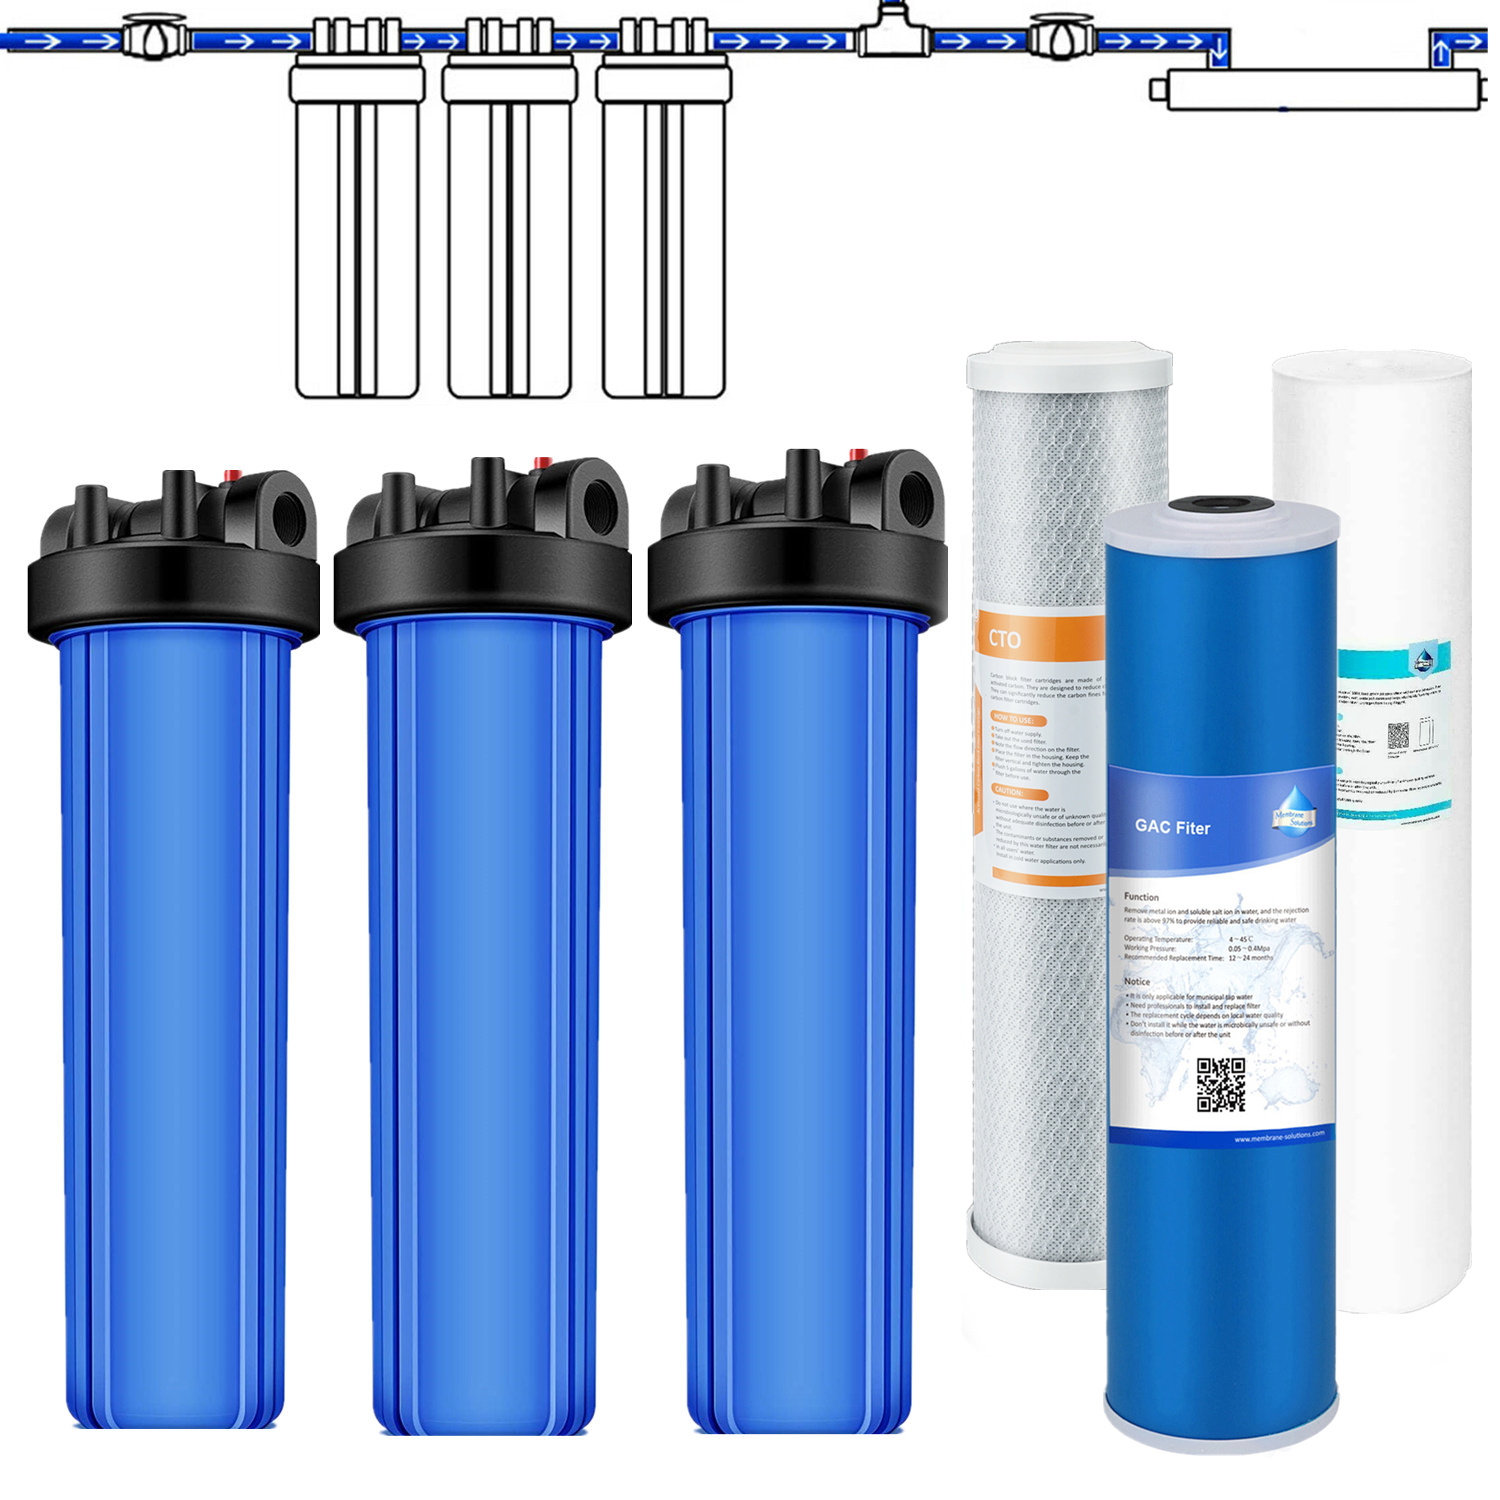 Brita 2 Pack 20" Big Blue Whole House Water Filter Housing Filtration System 6 Filters 